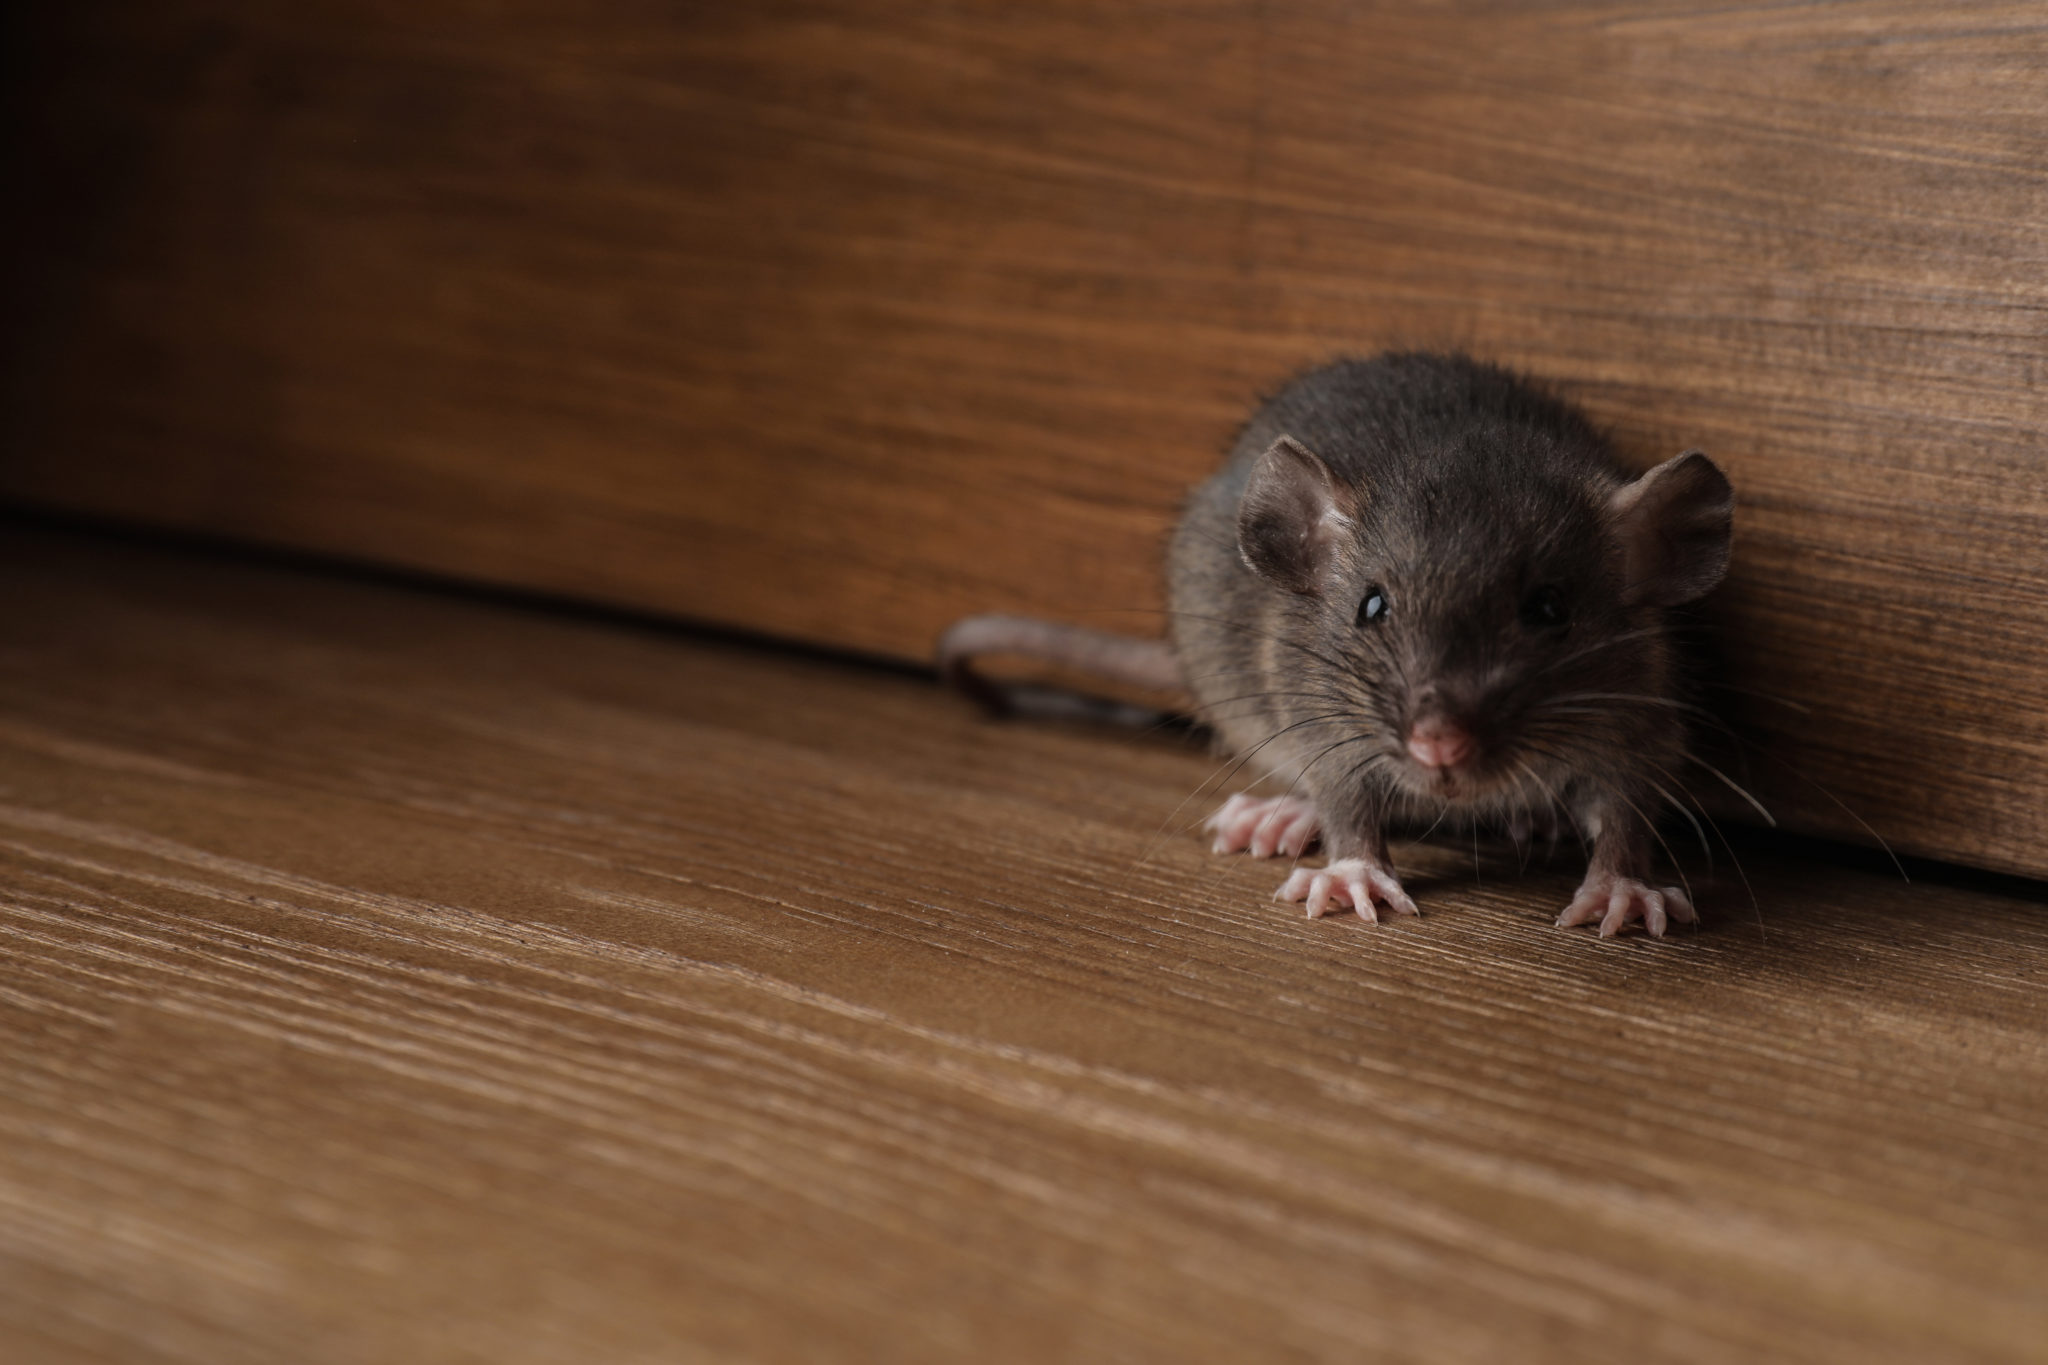 Rodent pest control in Gosford for your home